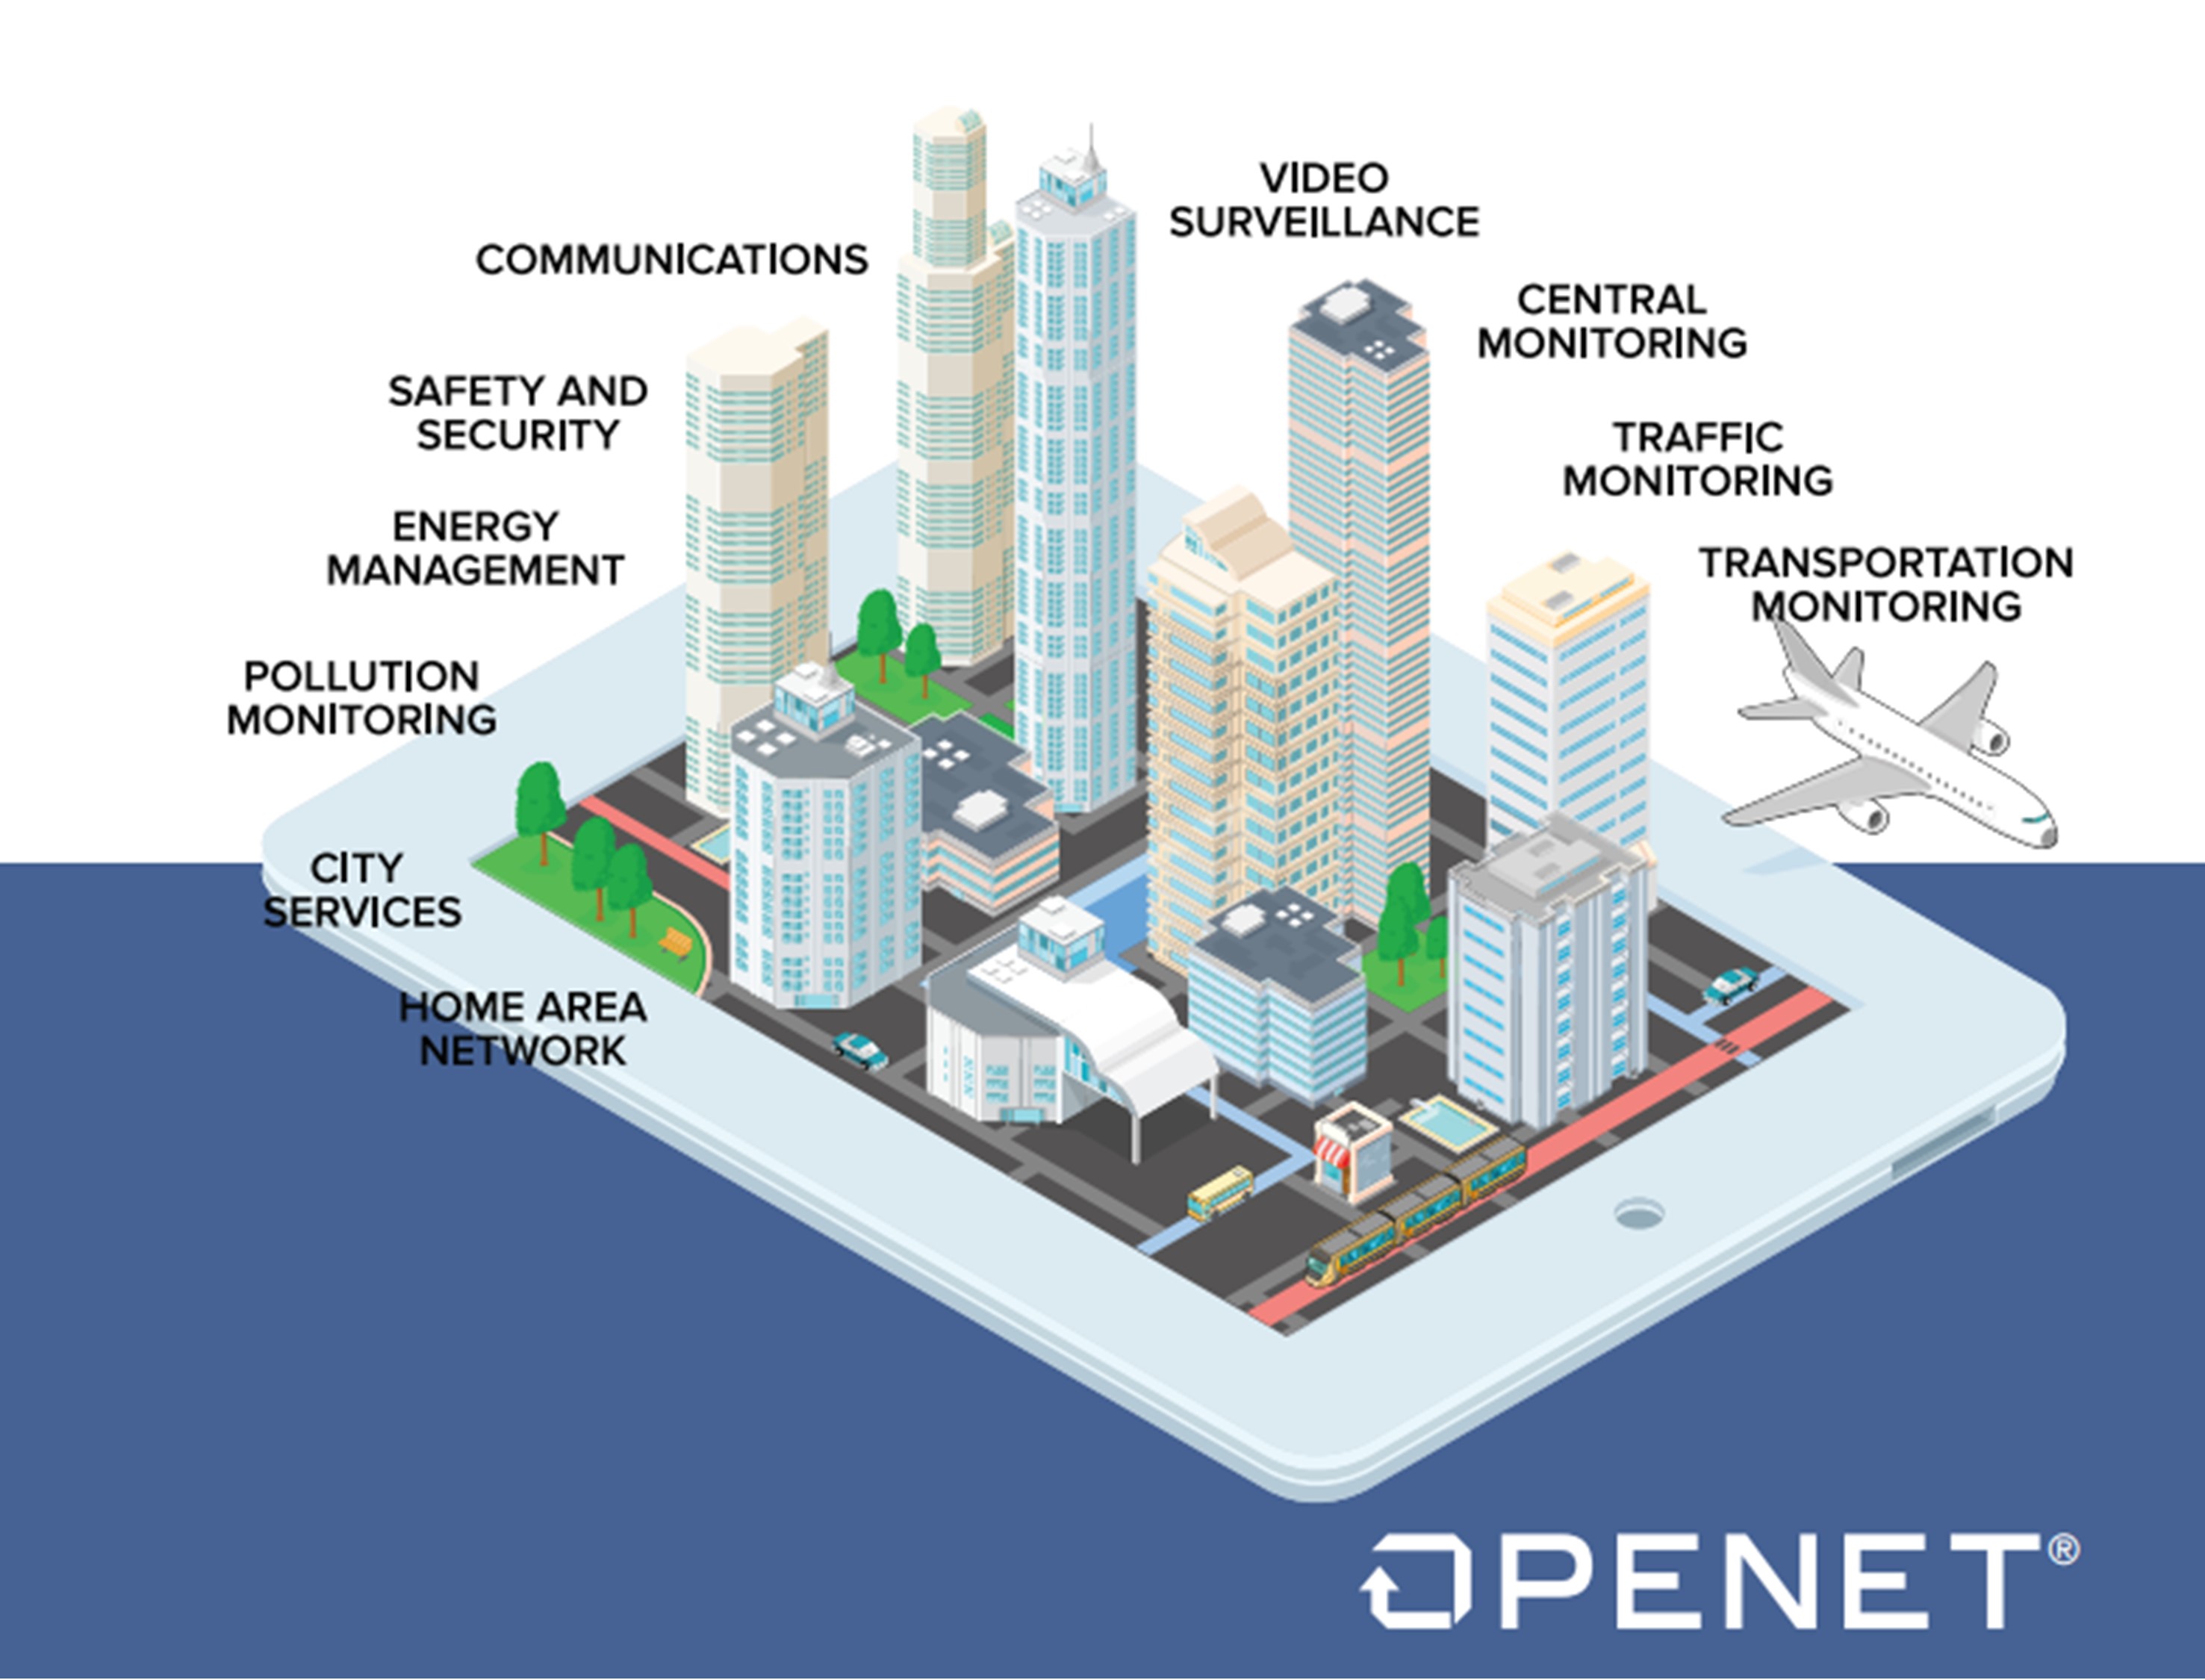 Clipping - Connected Smart Cities